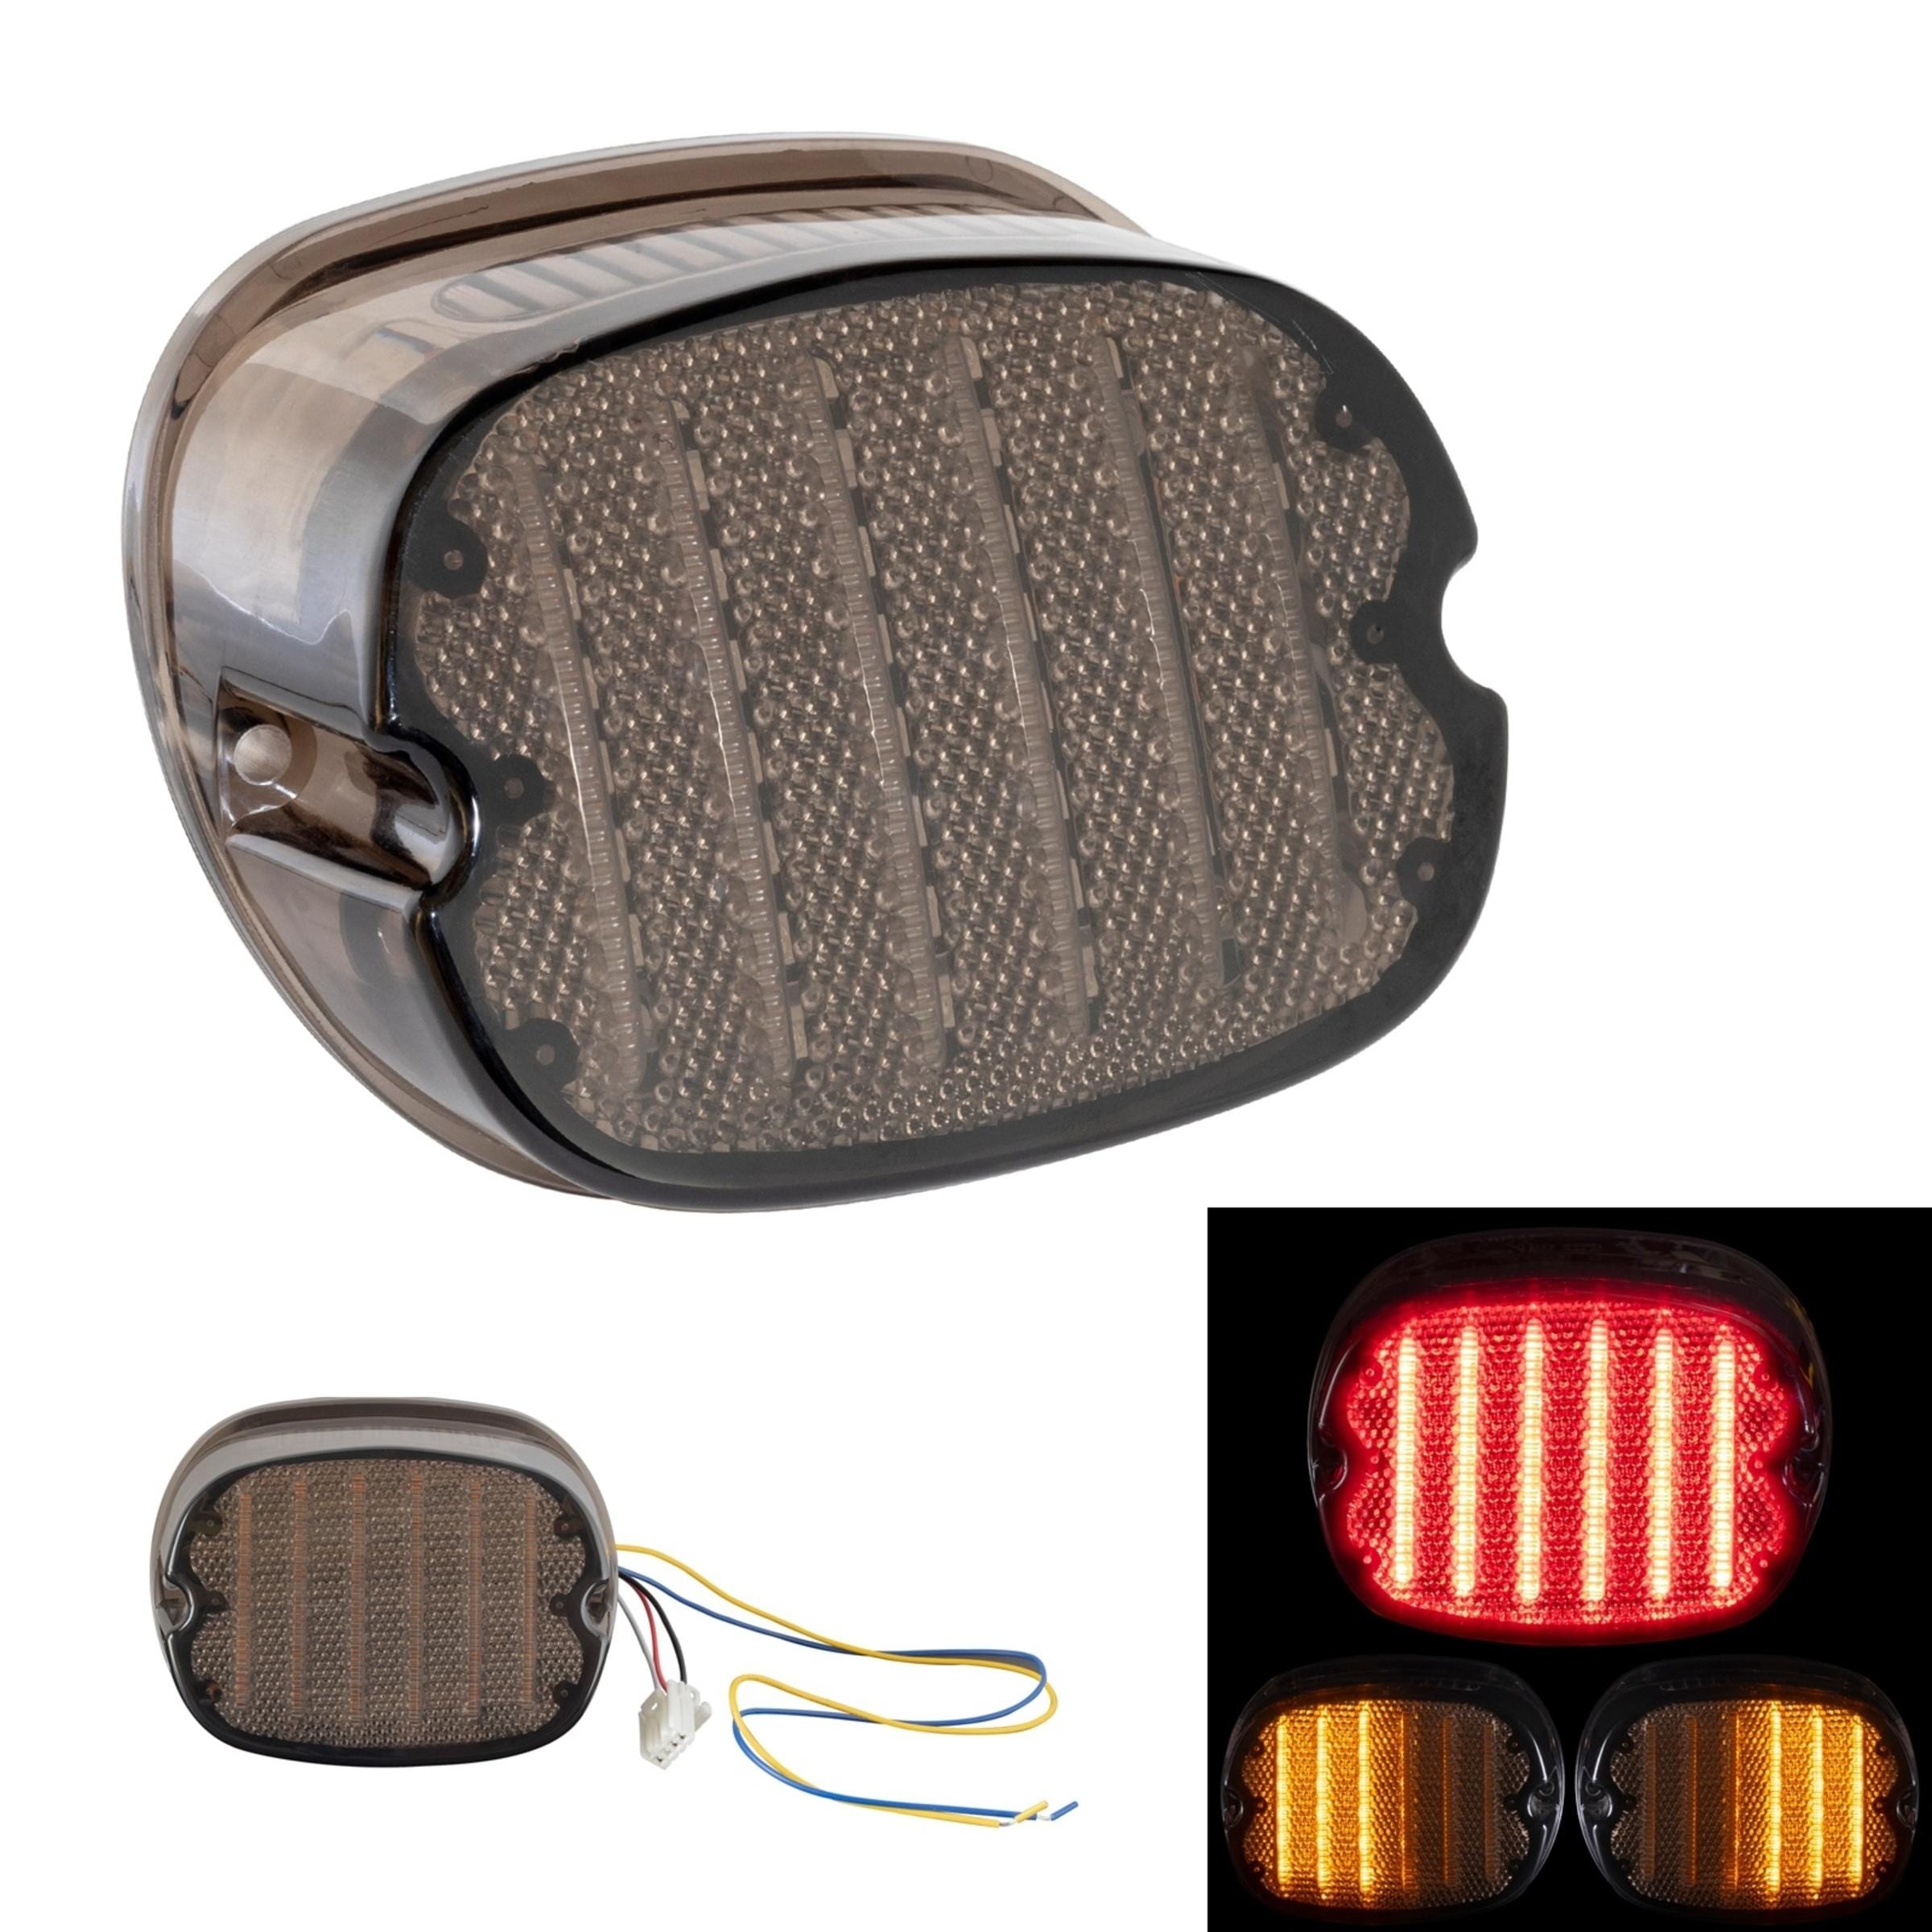 Featured image for “HOGWORKZ® Low Pro LED Taillight & Signals w/ Plate Light Smoked Lens”